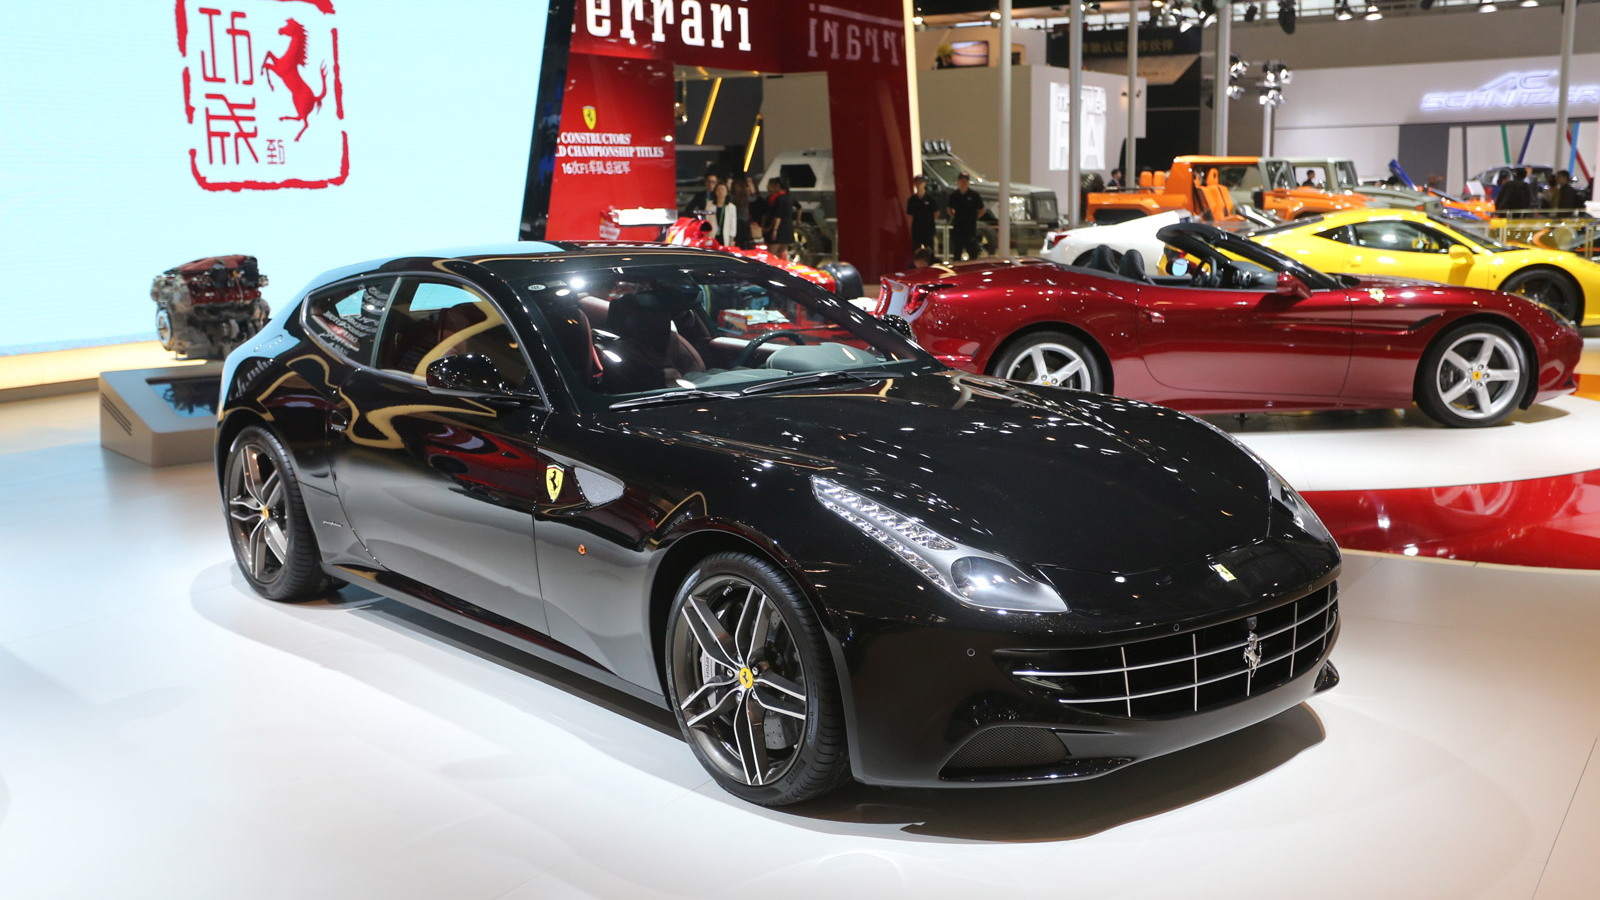 Ferrari Chinese year of the horse logo unveiled at 2014 Beijing Auto Show